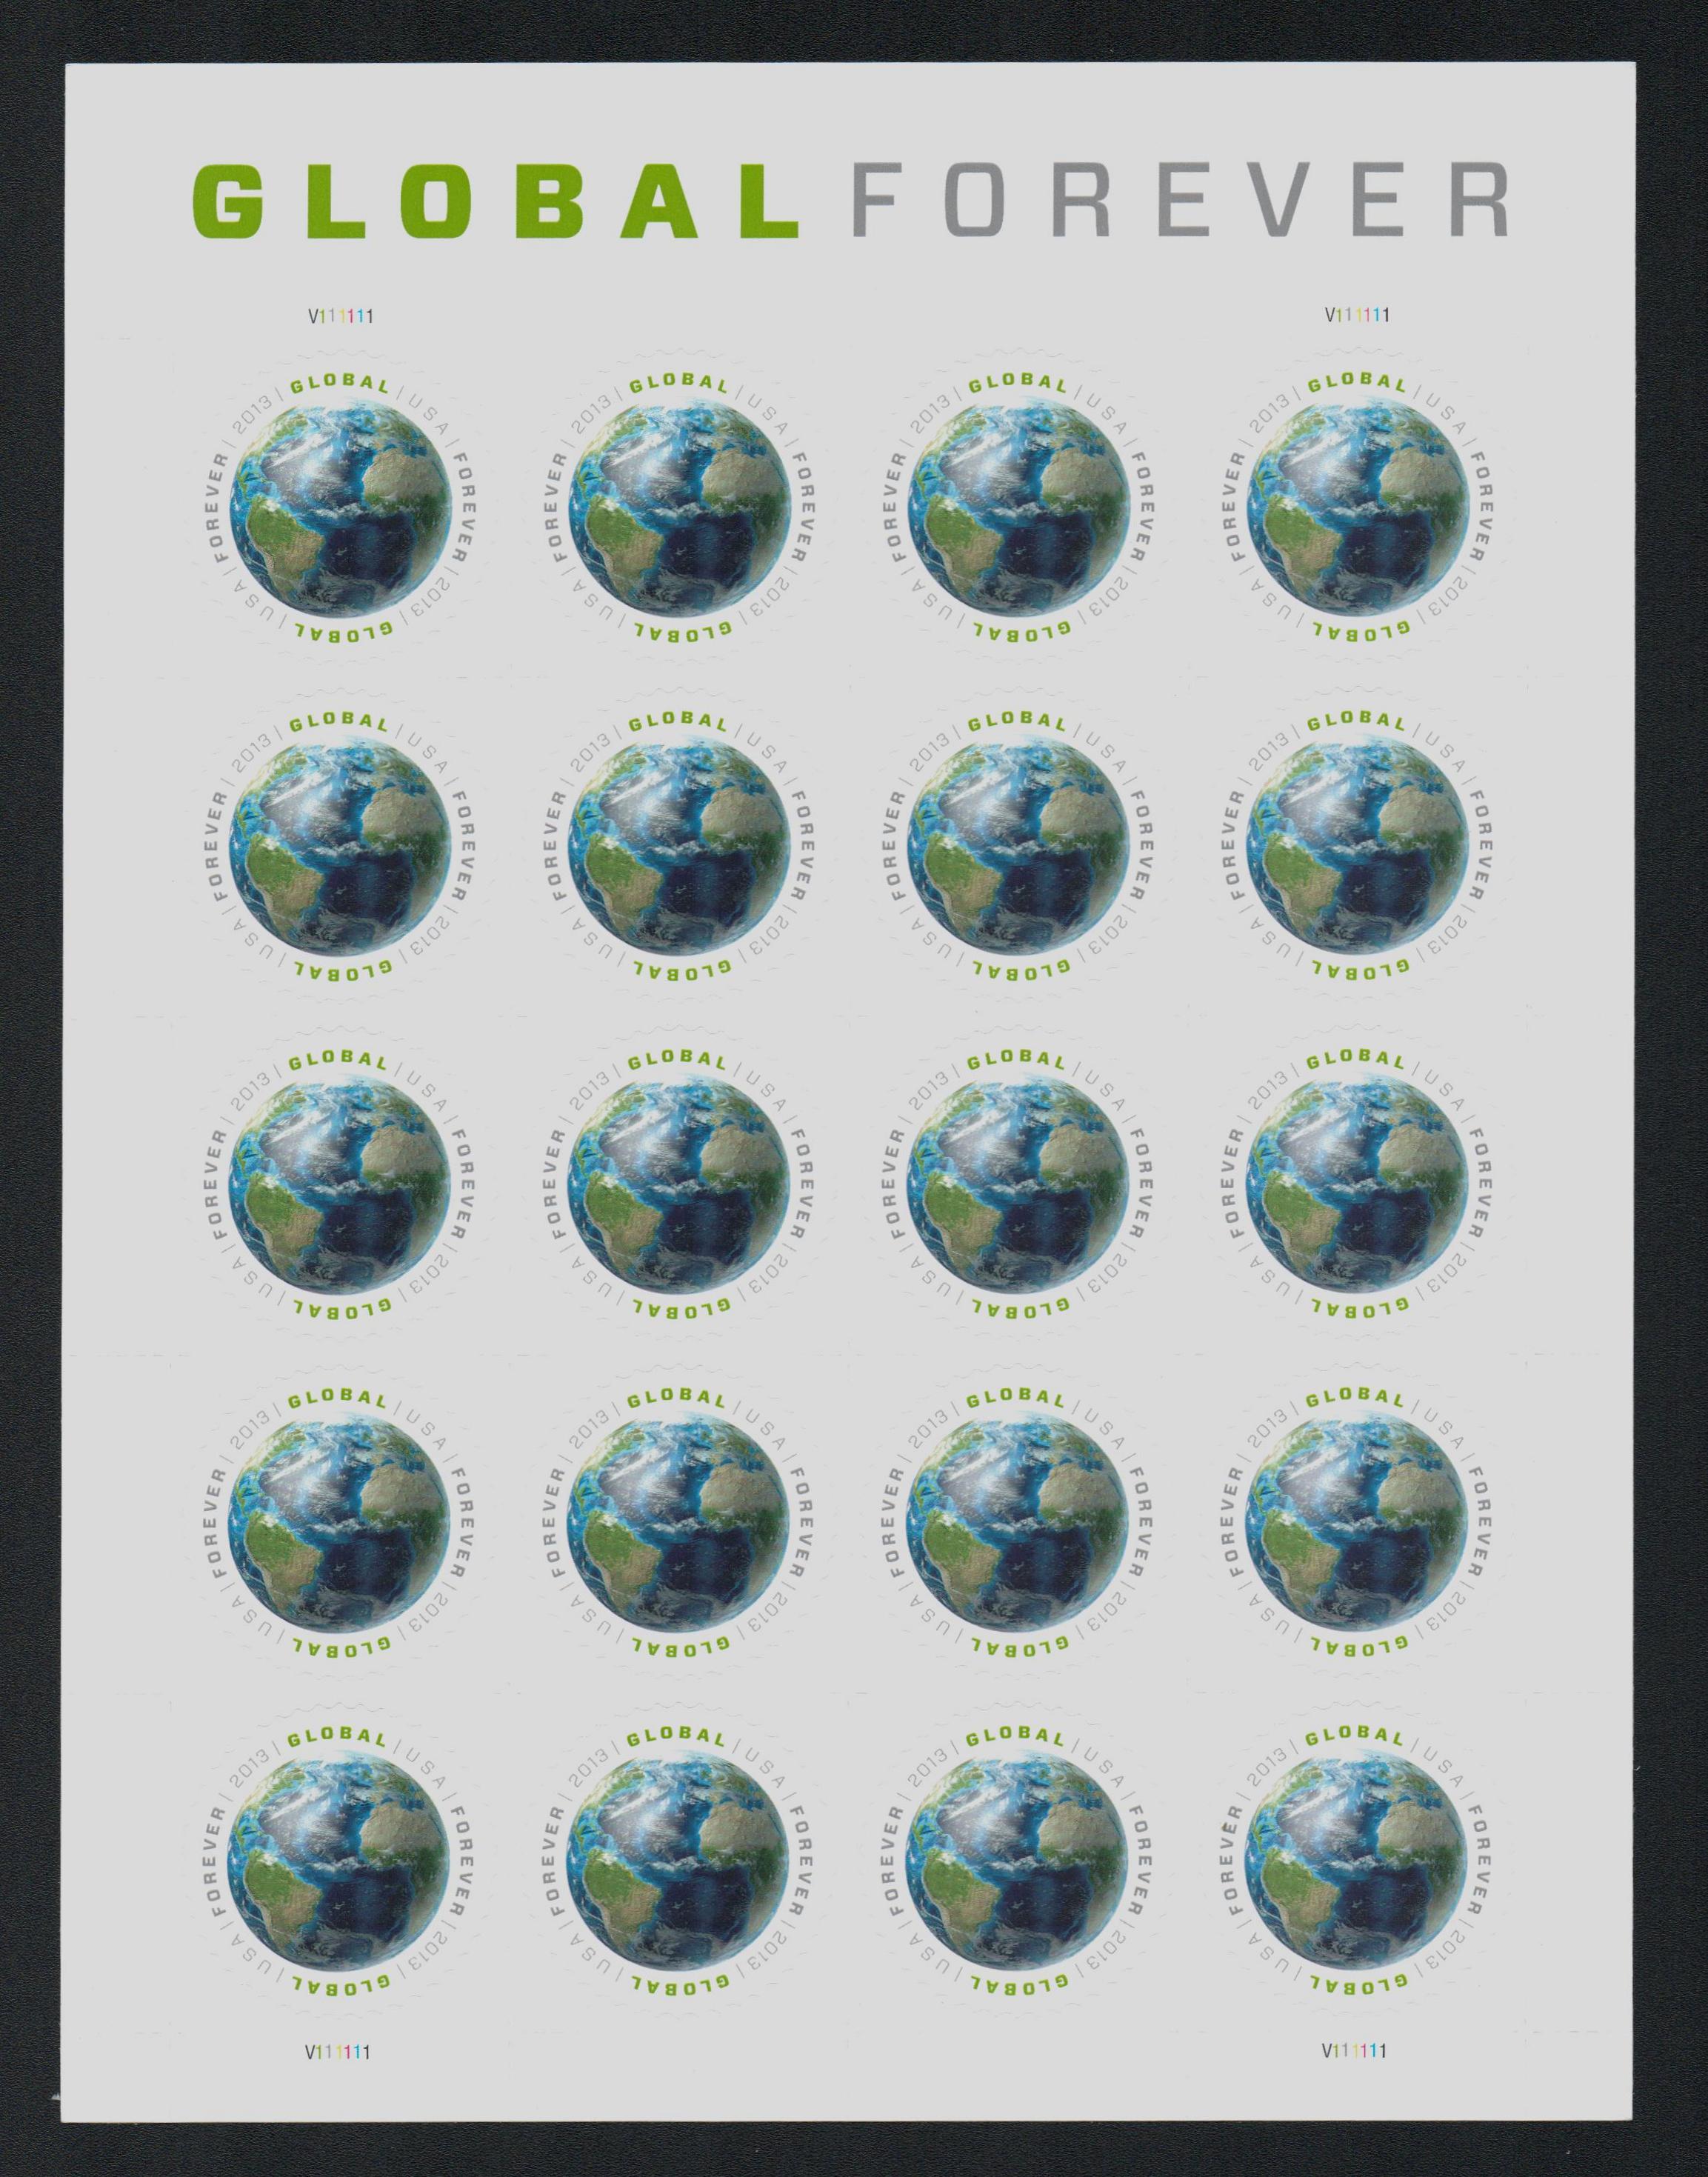 4740 - 2013 Global Forever Stamp - Earth - Mystic Stamp Company